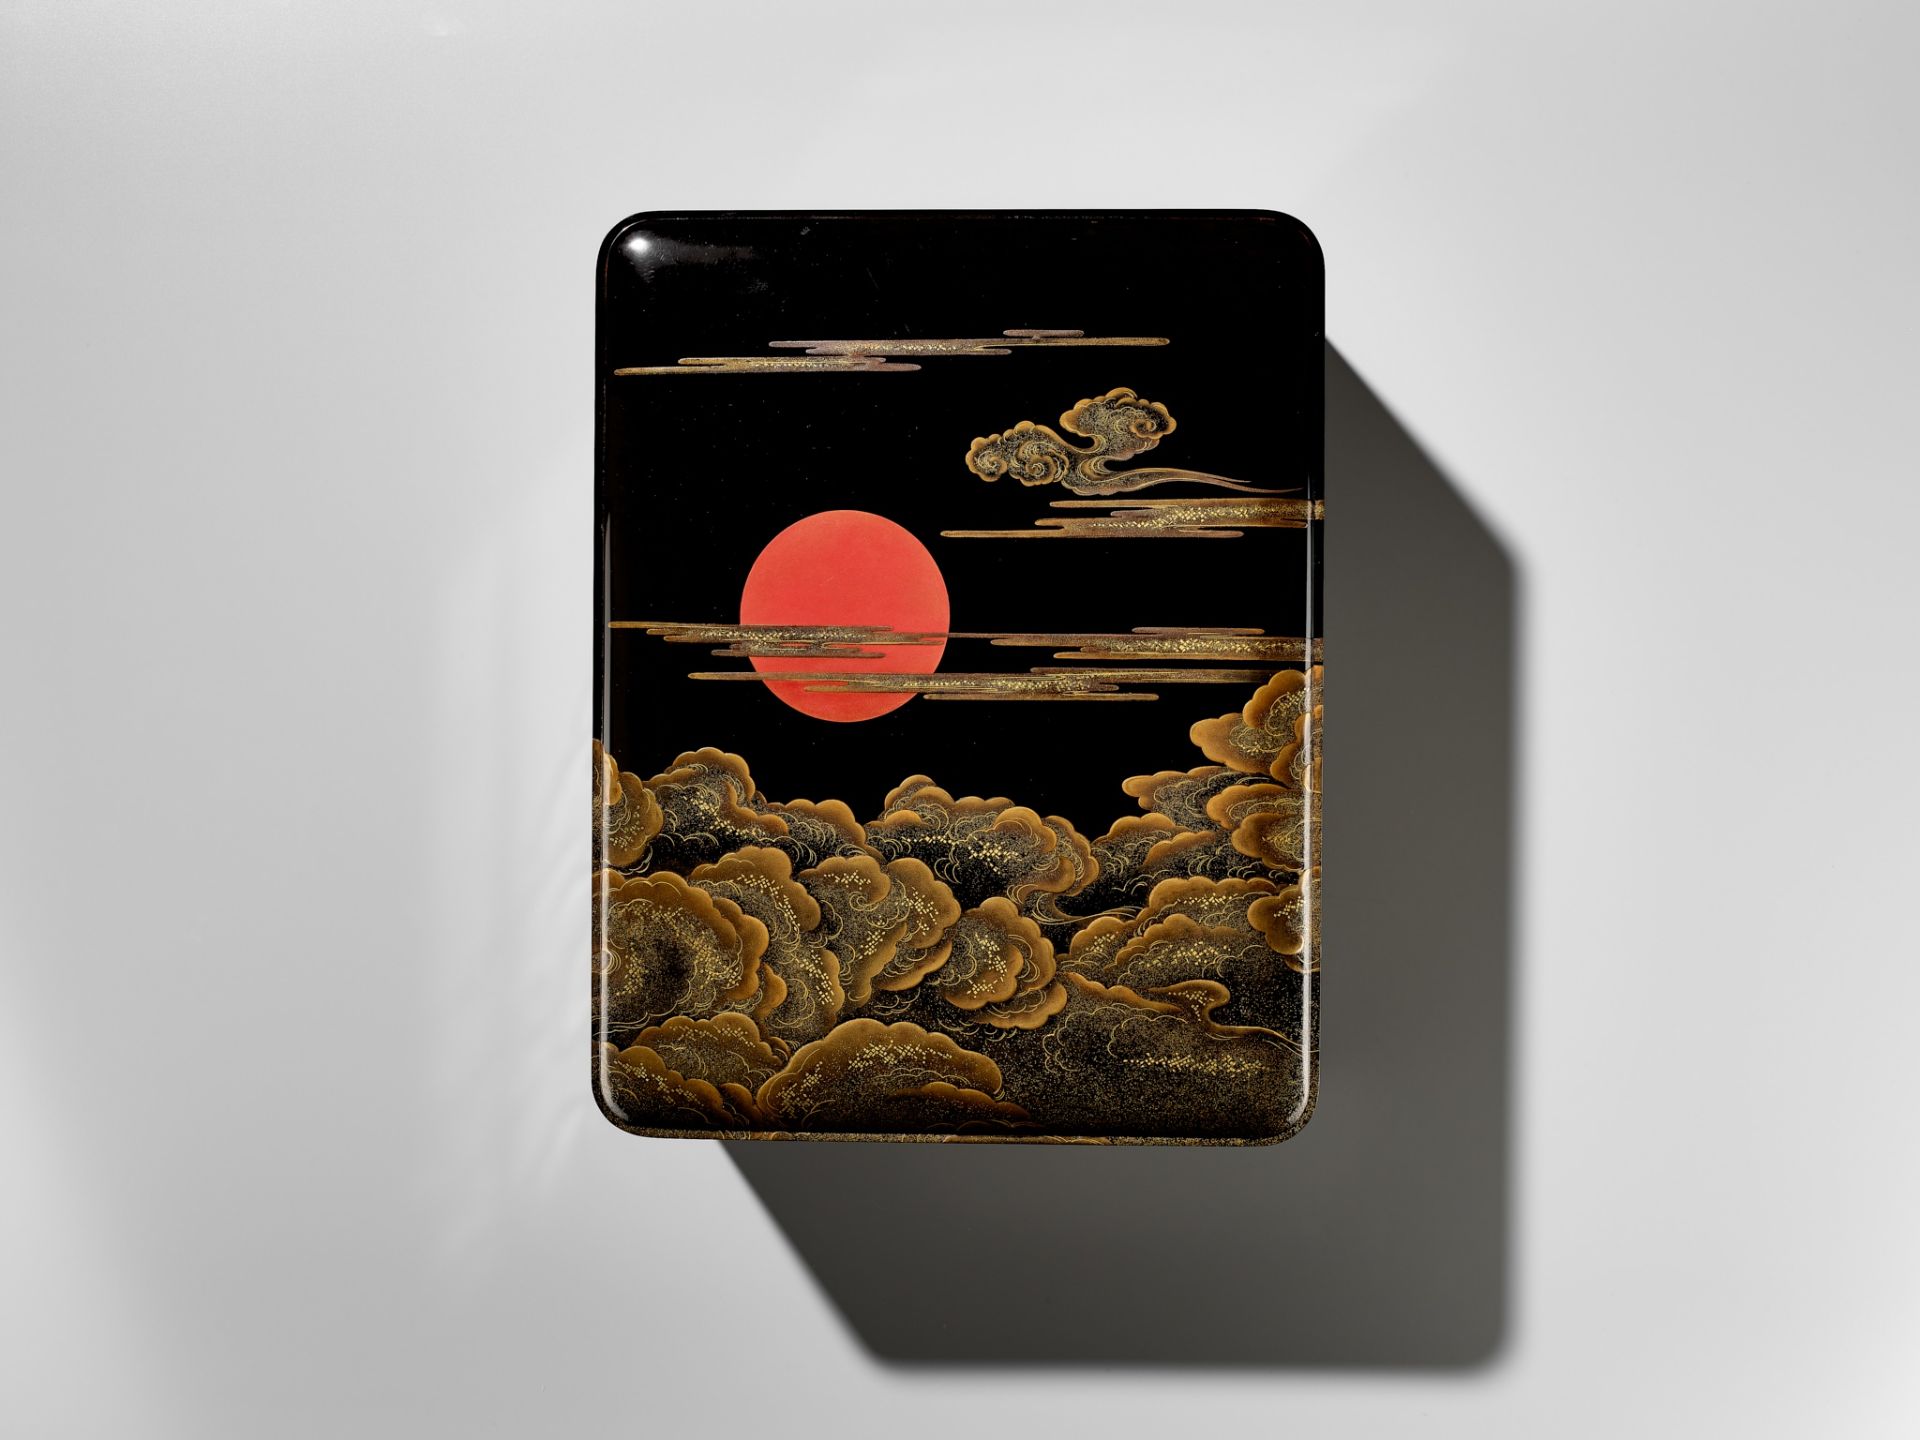 A MAGNIFICENT LACQUER WRITING SET WITH THE RISING SUN, CRESCENT MOON AND CLOUDS - Bild 2 aus 7